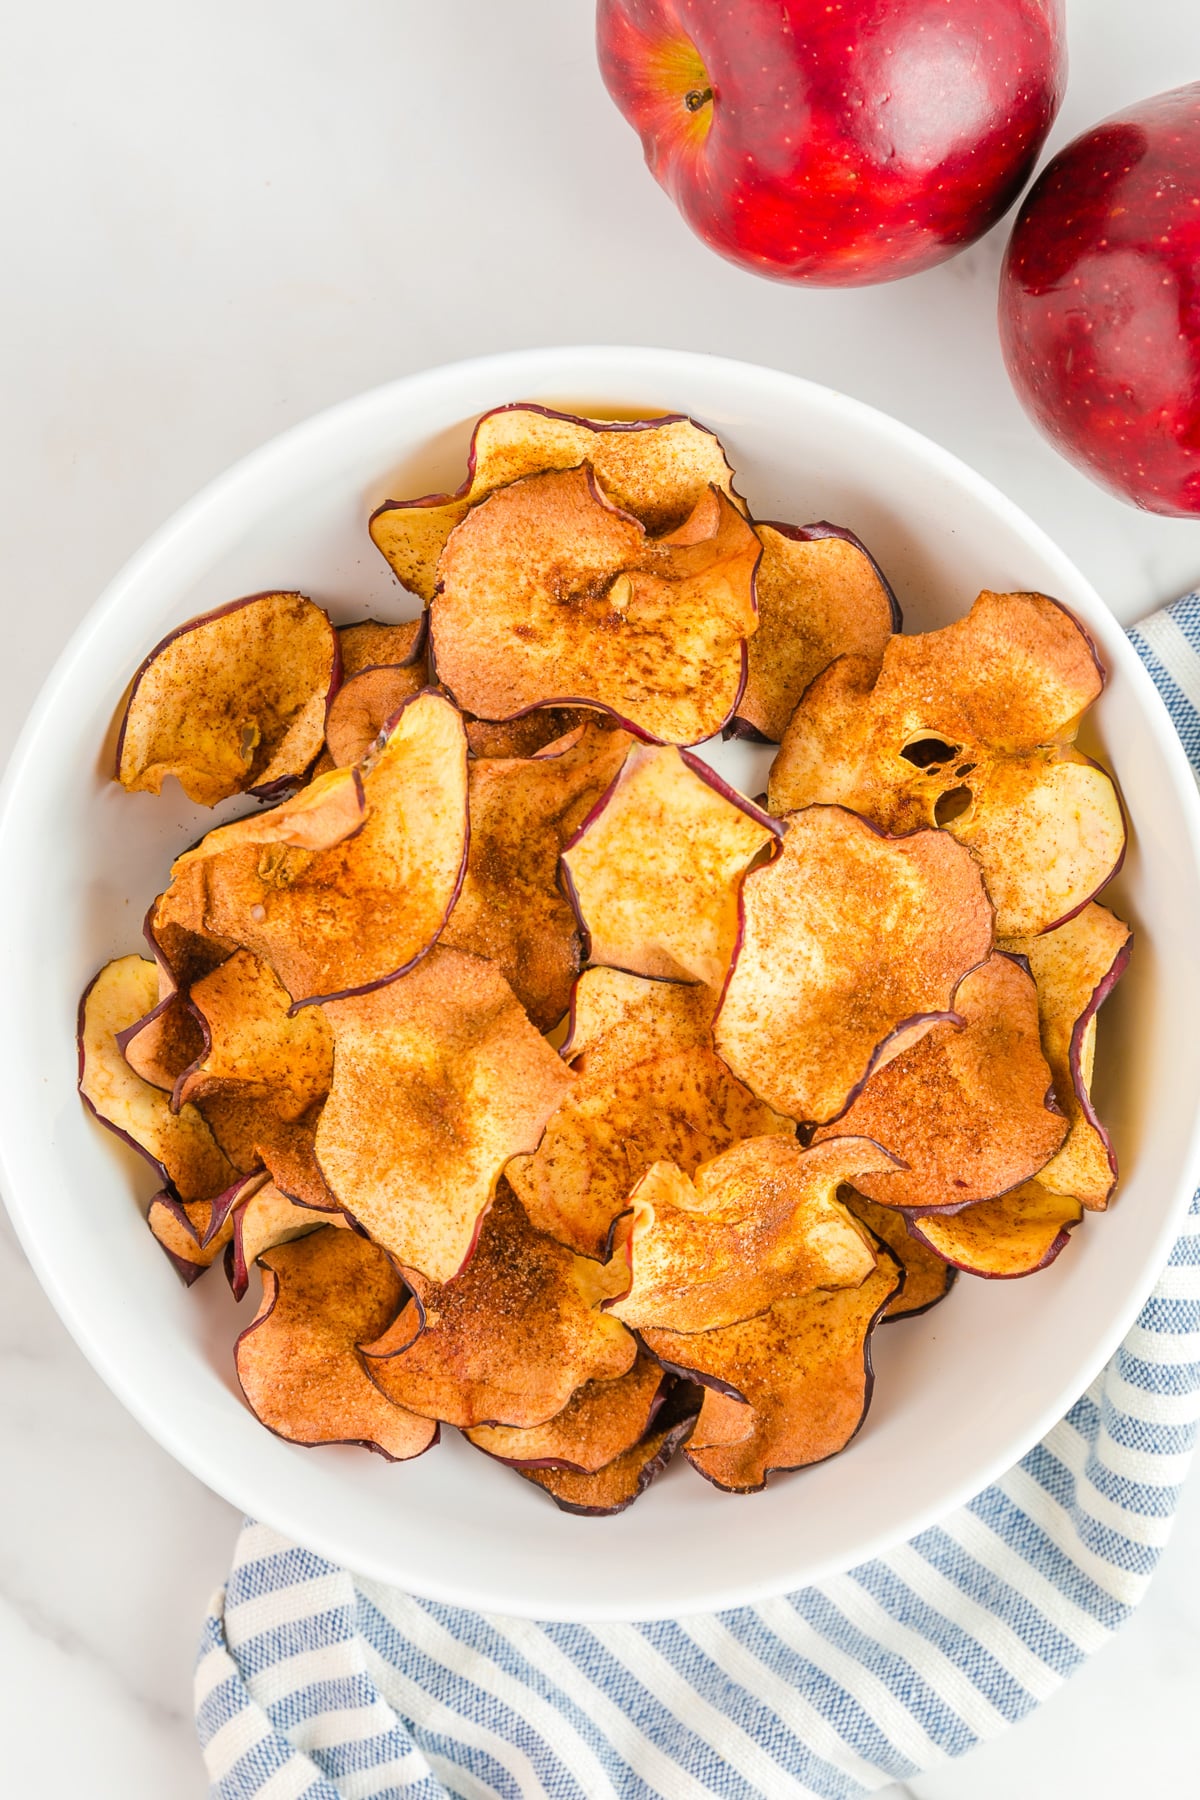 Apple chips in a bowl from above with two apples on the counter nearby.